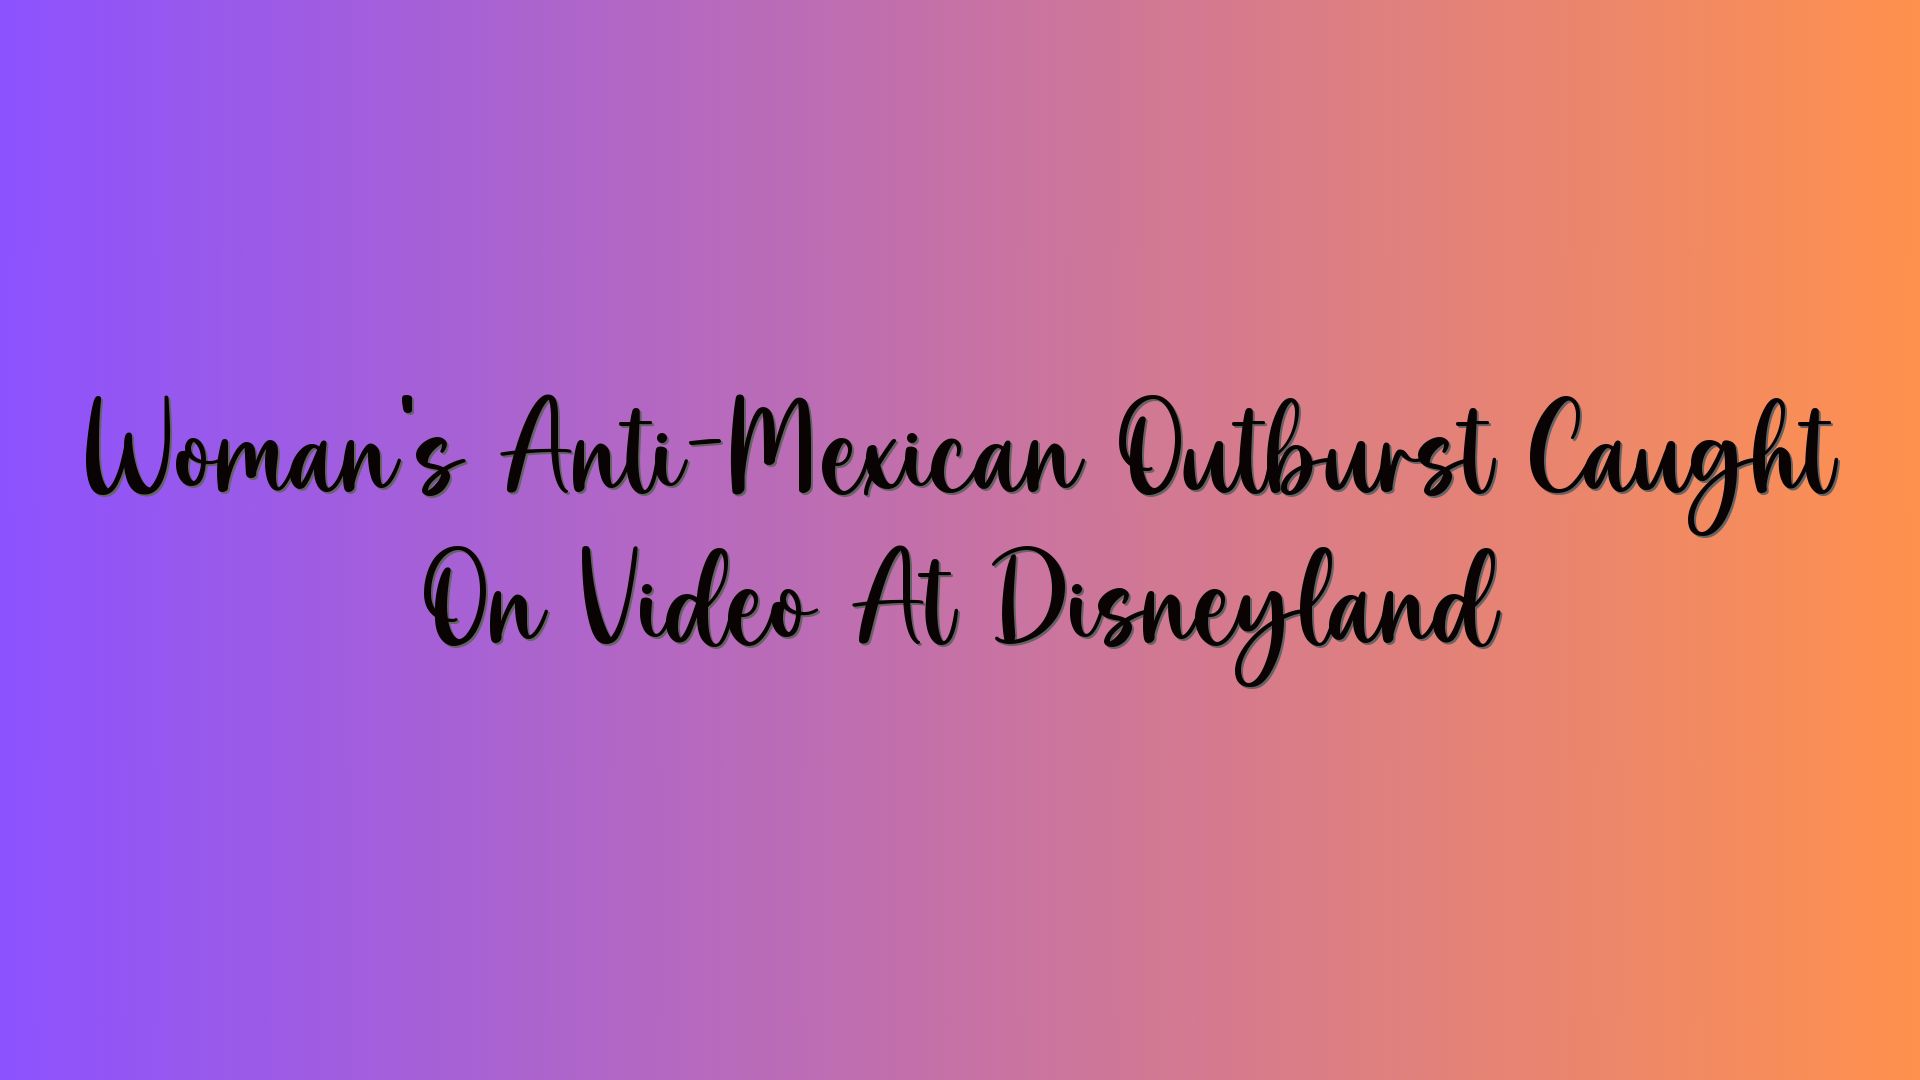 Woman’s Anti-Mexican Outburst Caught On Video At Disneyland